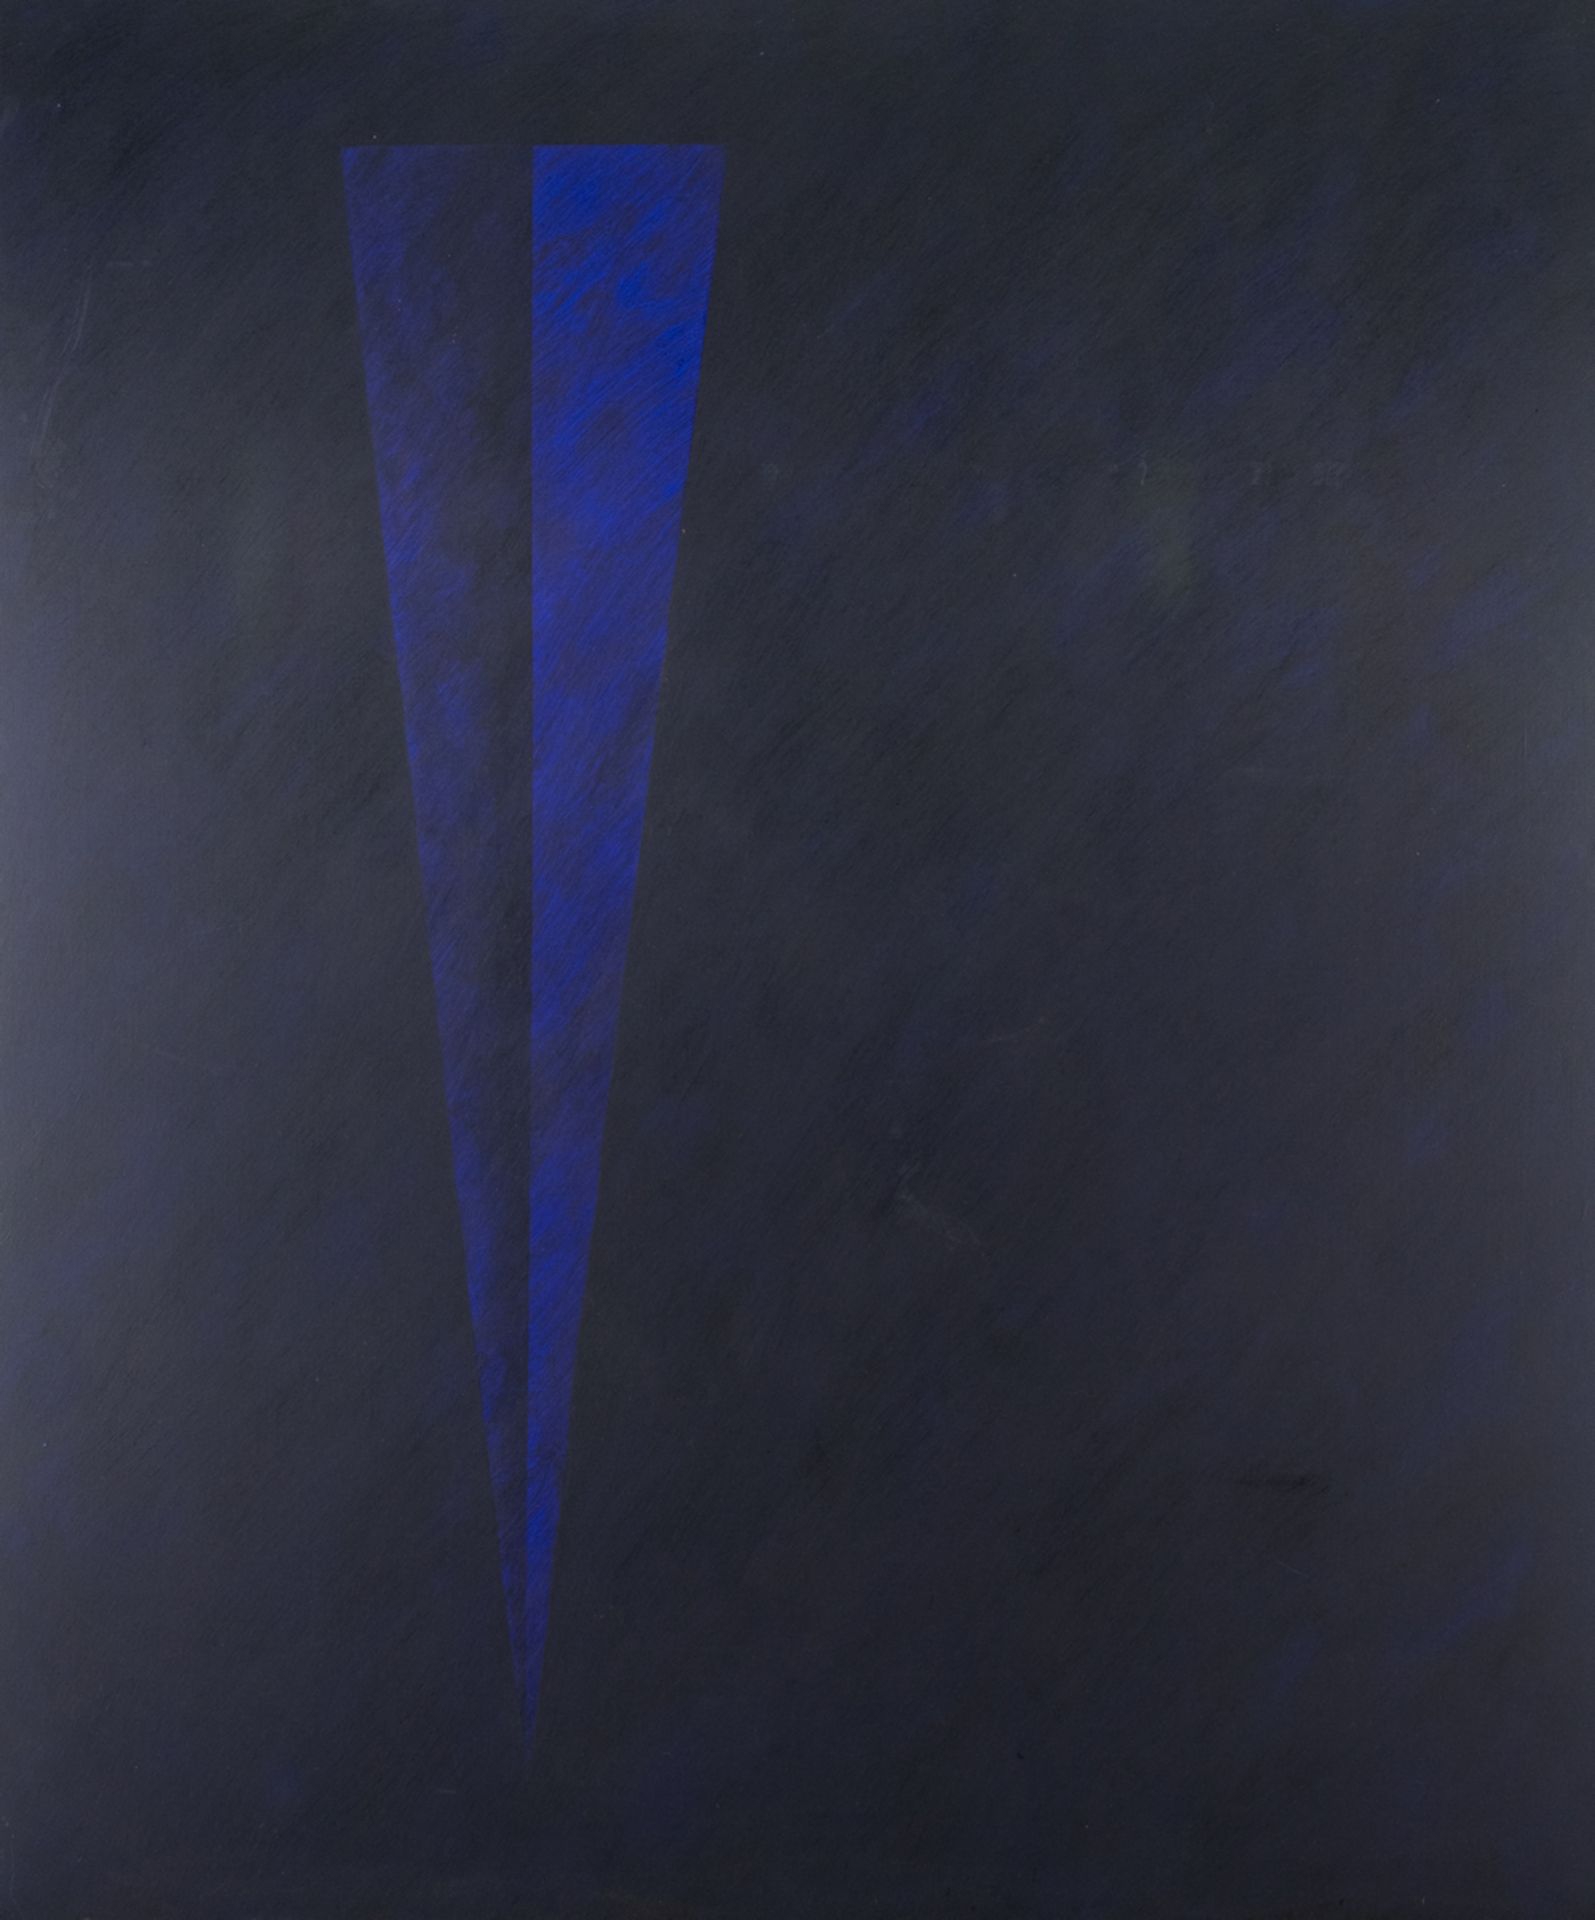 Swimberghe G. (countersigned on the reverse), untitled, oil on canvas, dated December 1991, 150 x